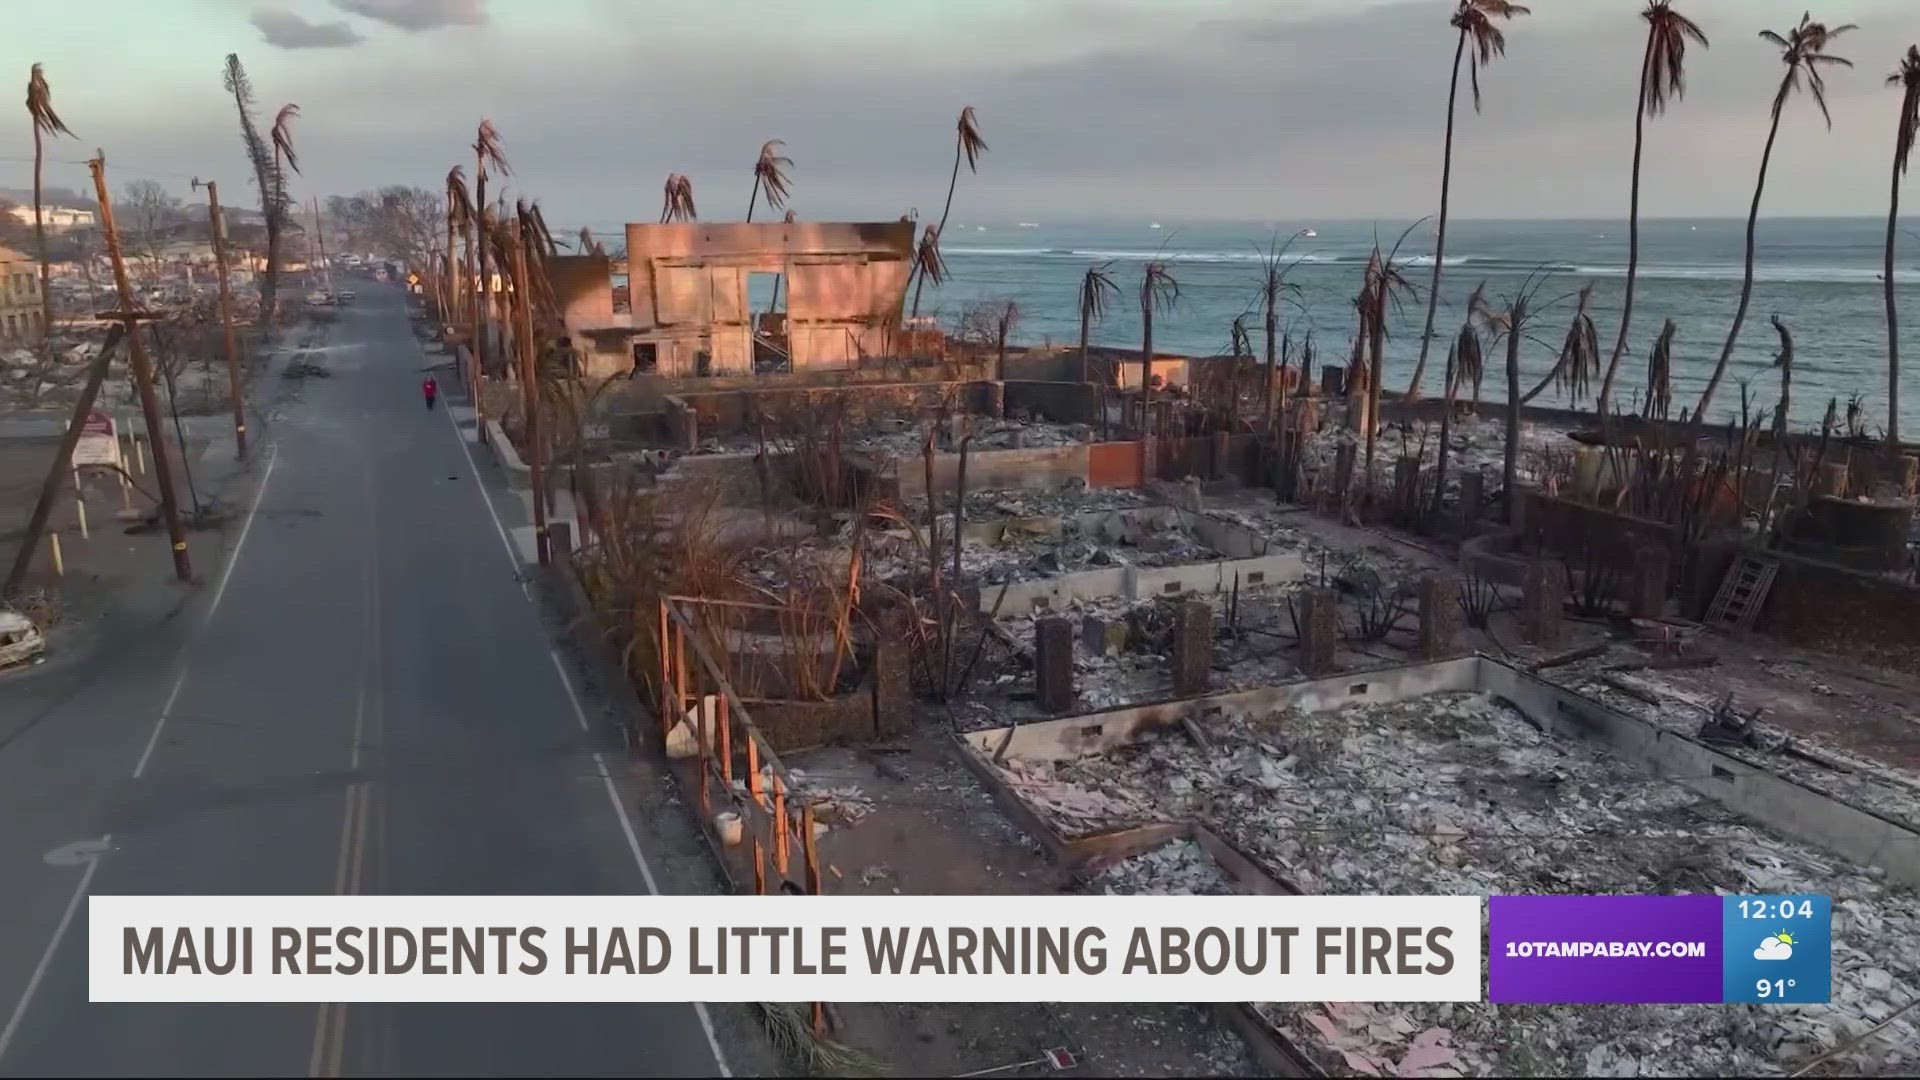 Hawaii emergency management records show no indication that warning sirens were triggered before a devastating wildfire destroyed through a historic town.